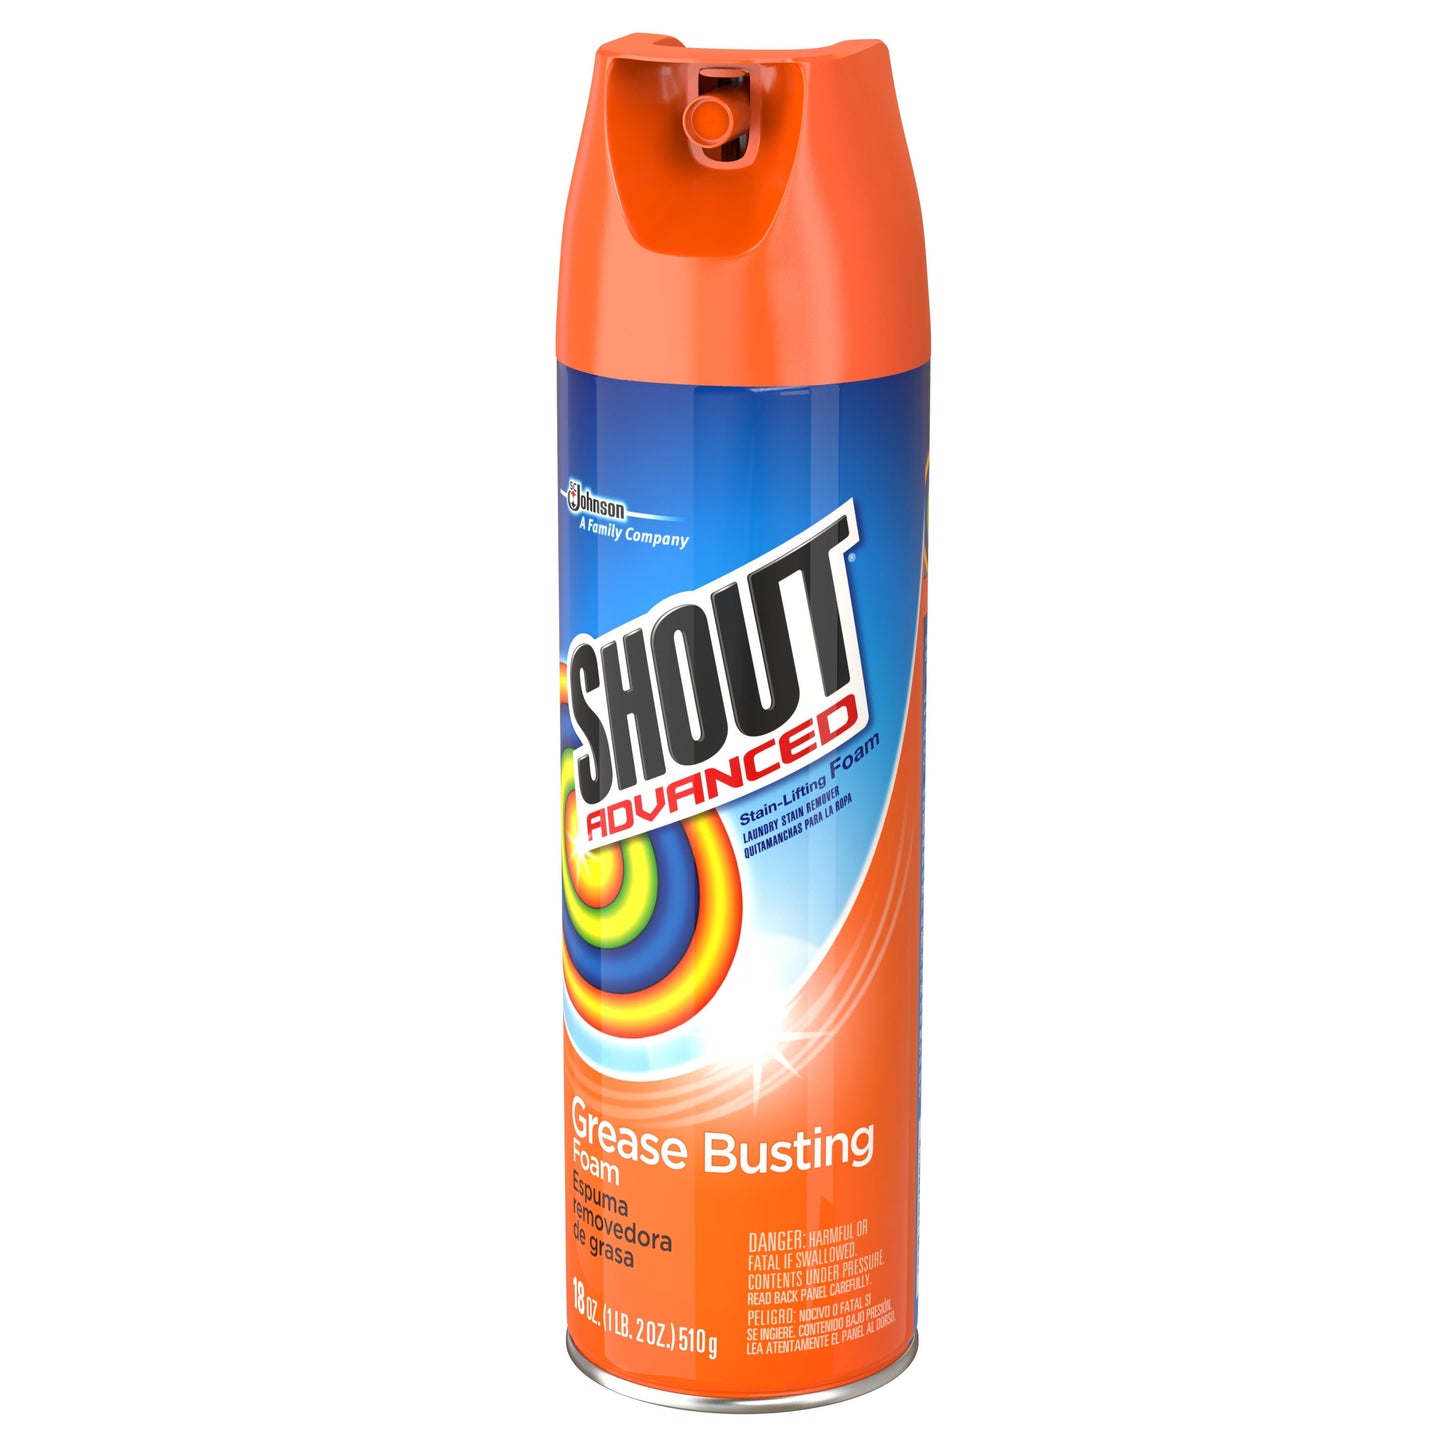 Shout Advanced Grease Busting Foam, Laundry Stain Remover, 18 Ounce